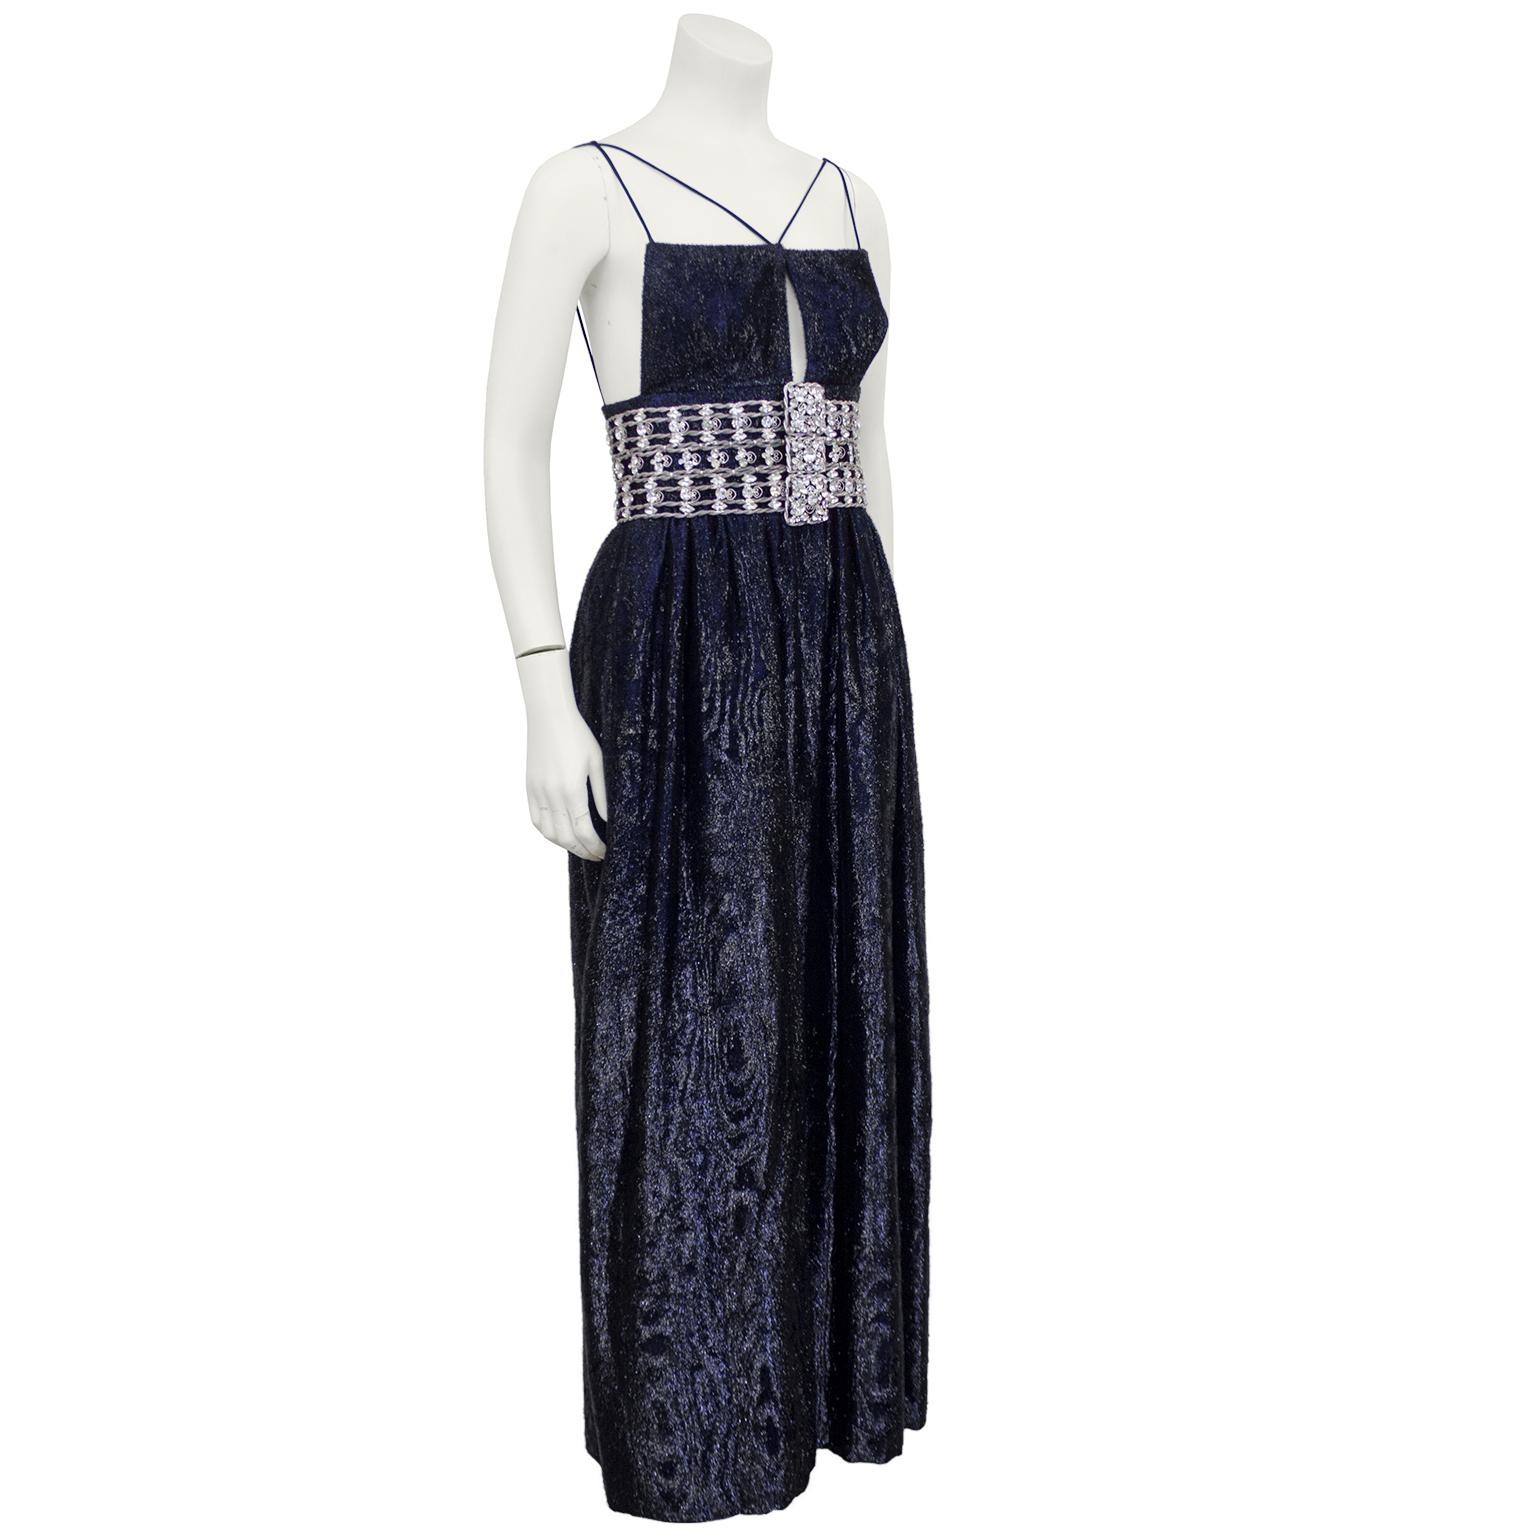 1970's Maggy Reeves tinsel applique velvet midnight blue gown. Custom demi couture gown hand made by Canadian couturier. Her attention to detail was legendary and the accessories provided, in this case a hand created silver wrapped wire and